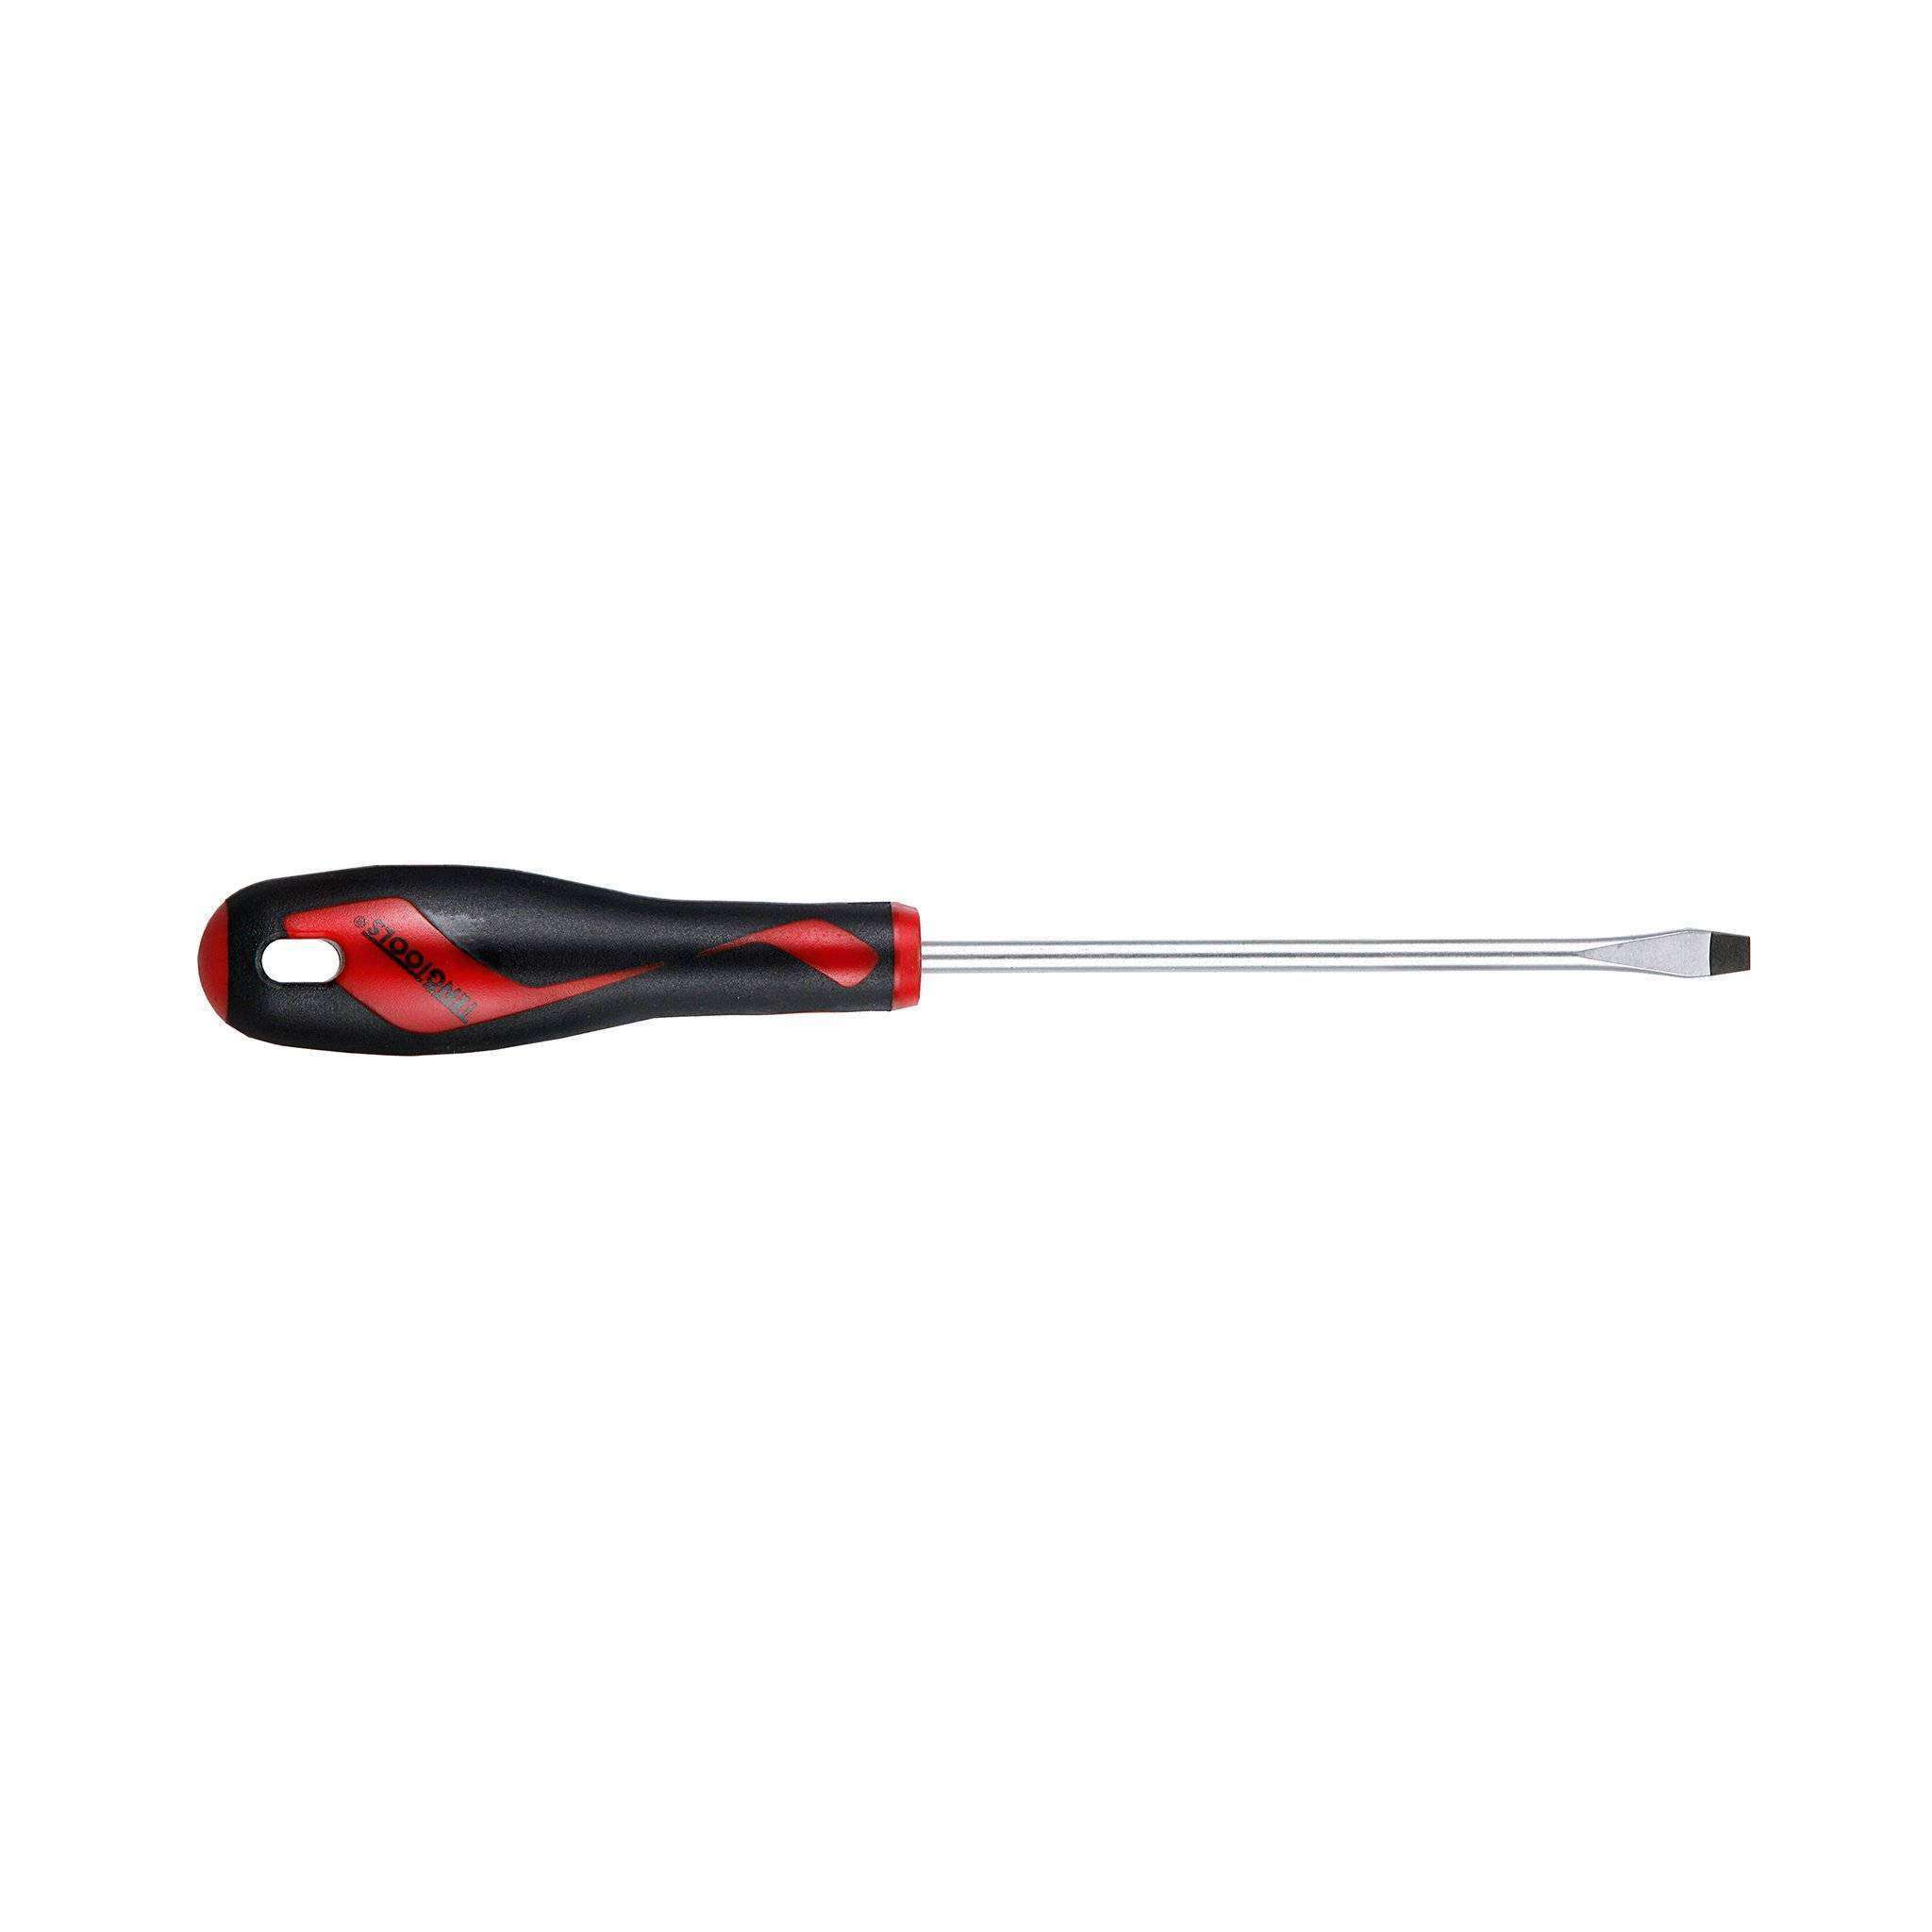 Teng Tools 3mm / 1/8 Inch X 75mm / 3 Inch Long Flat Type Slotted Head Screwdriver - MD920N